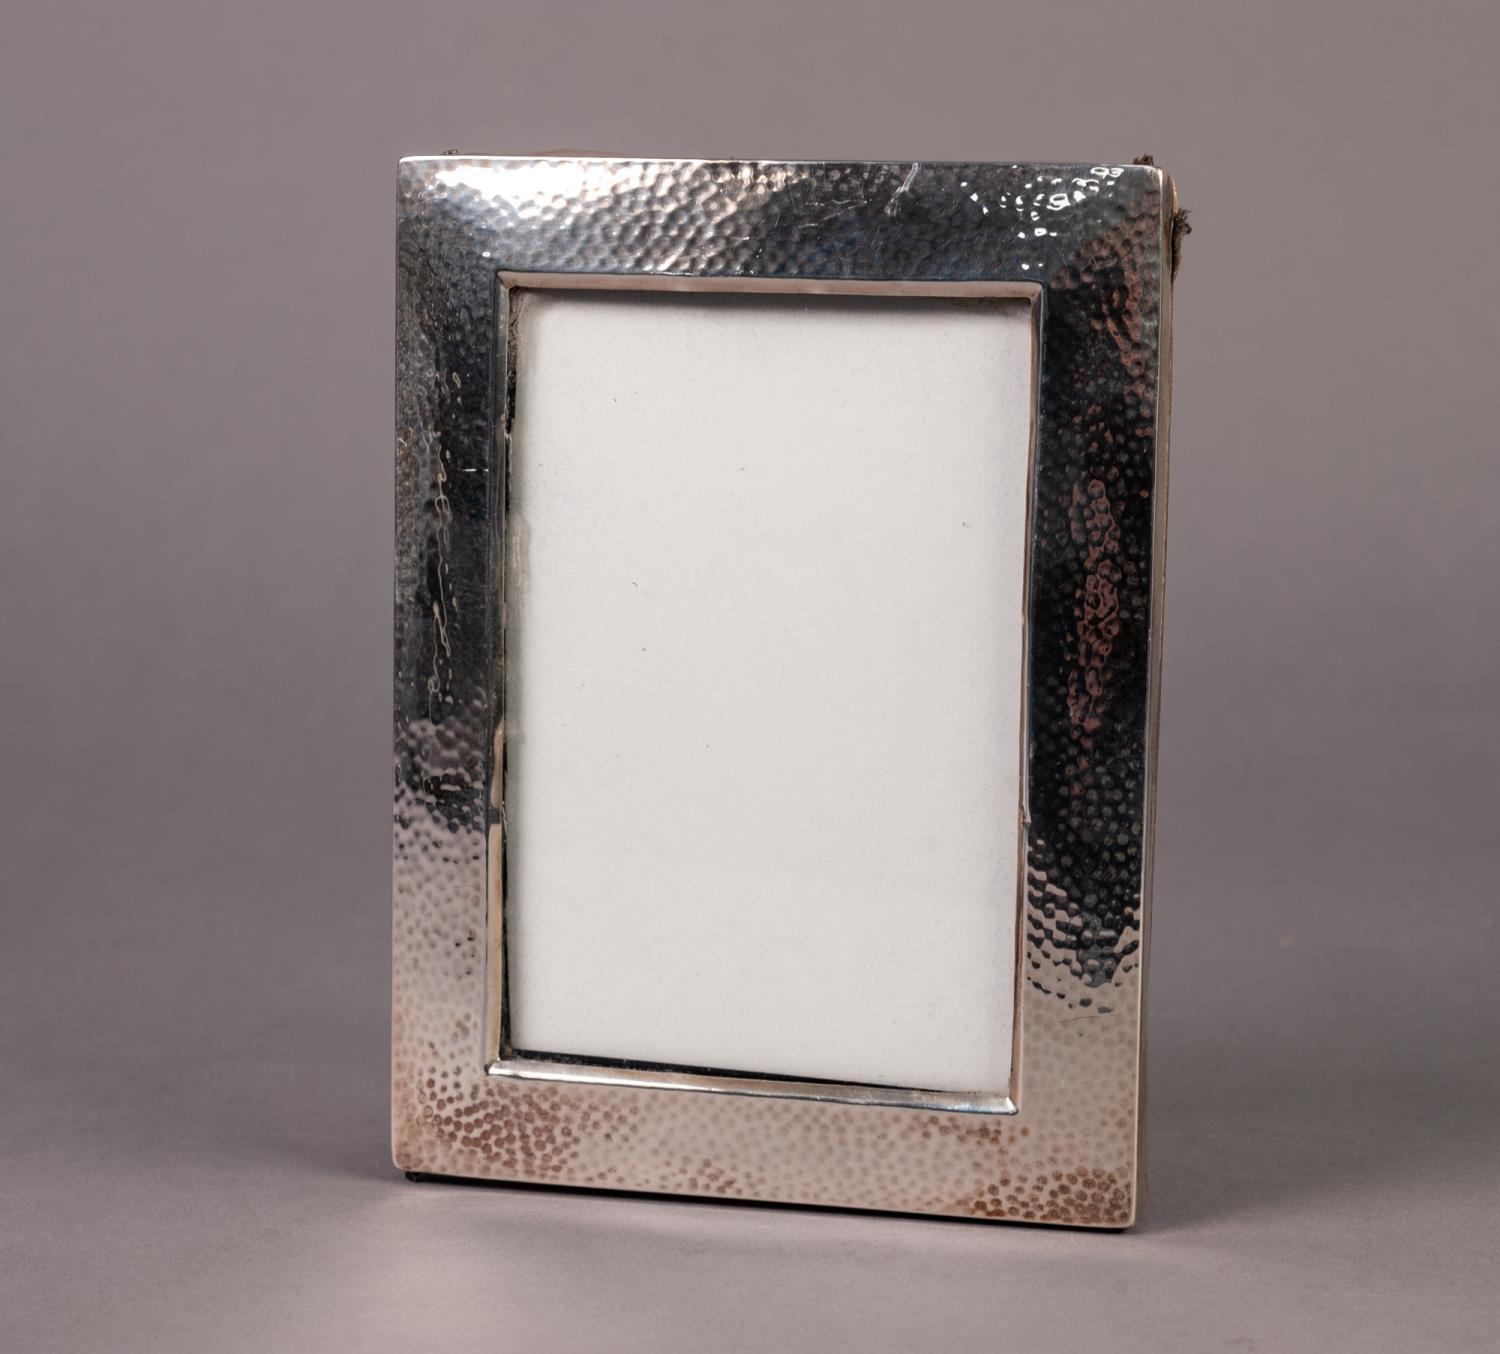 PLANISHED SILVER FRONTED PHOTOGRAPH FRAME, of oblong form, lacking easel support, marks rubbed, 7